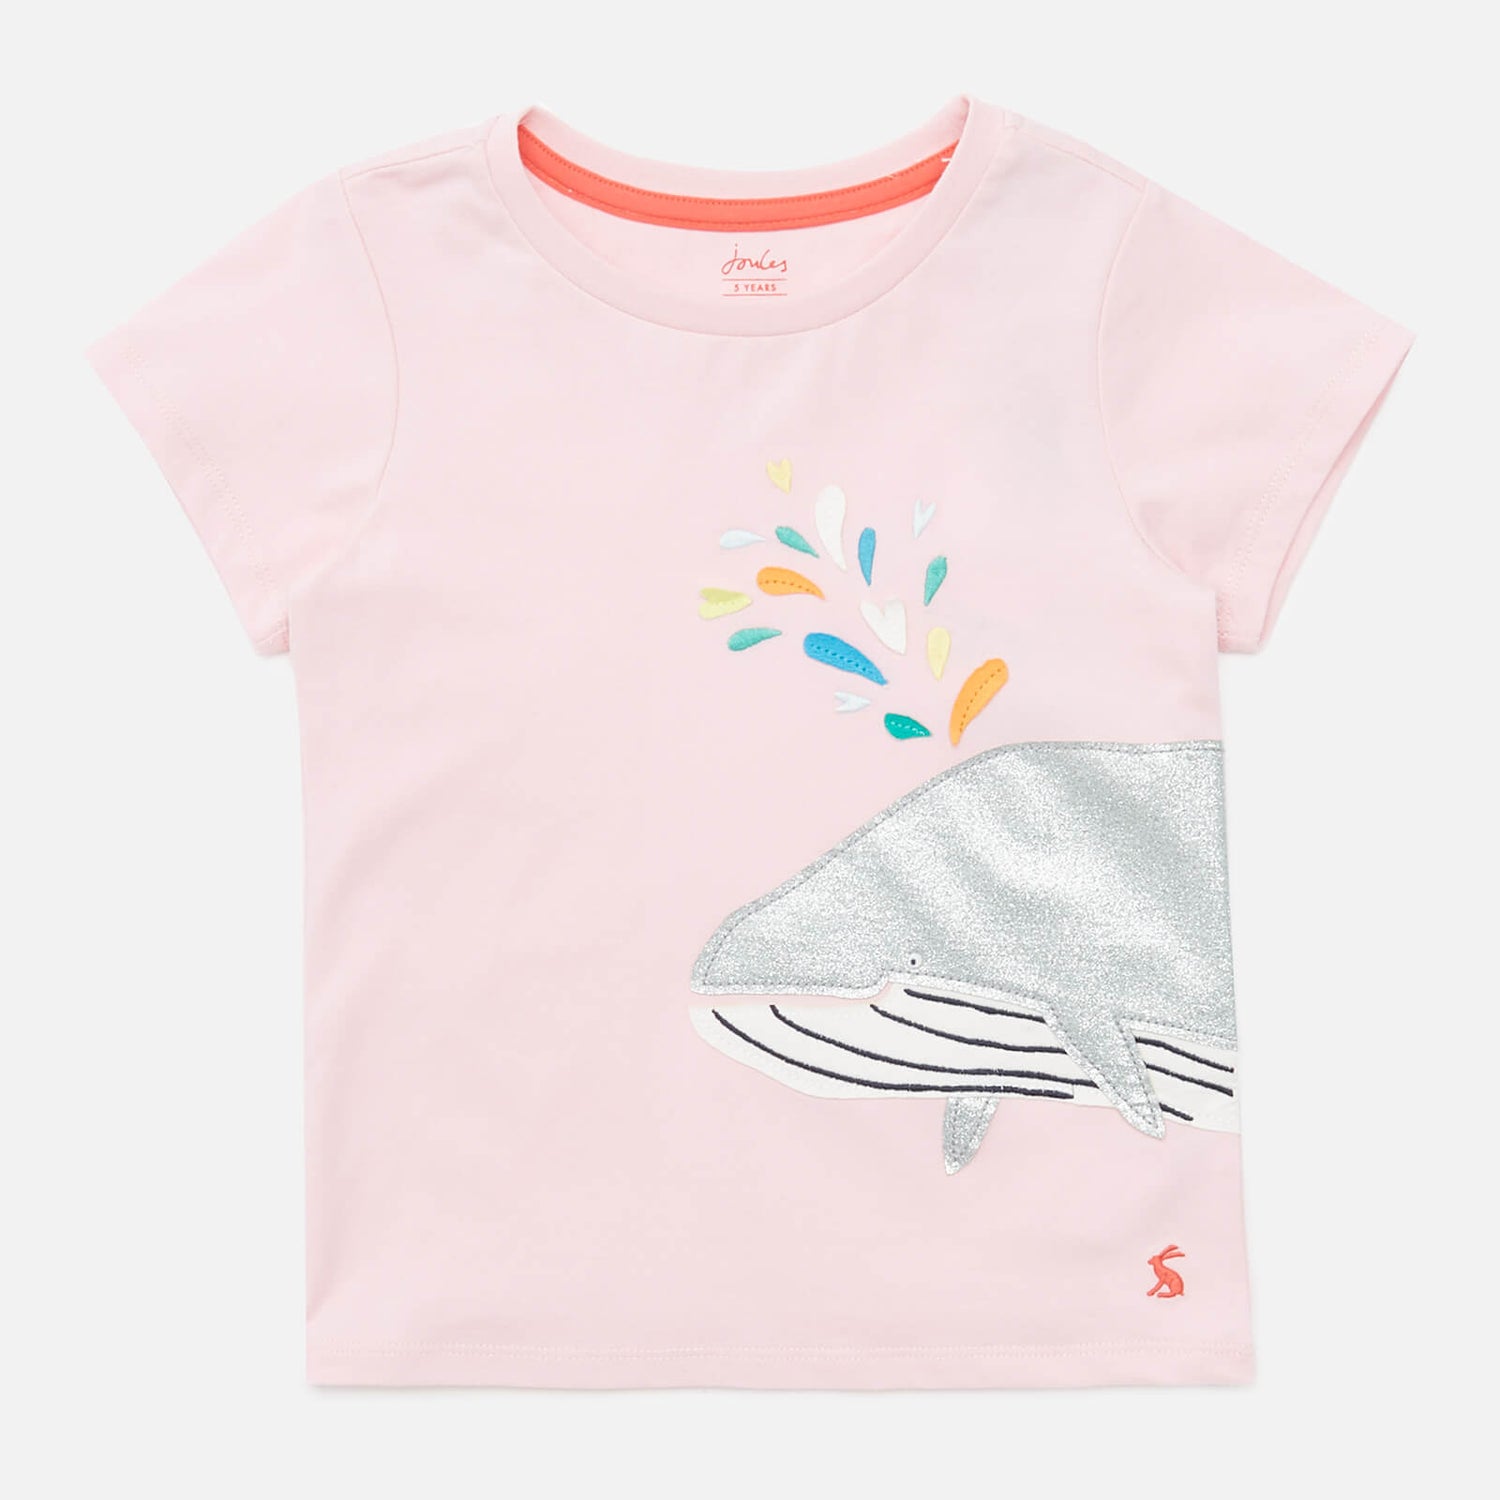 Joules Kids' Shorts Sleeve 2 Way Sequin Artwork T-Shirt - Pink Whale - 7 Years